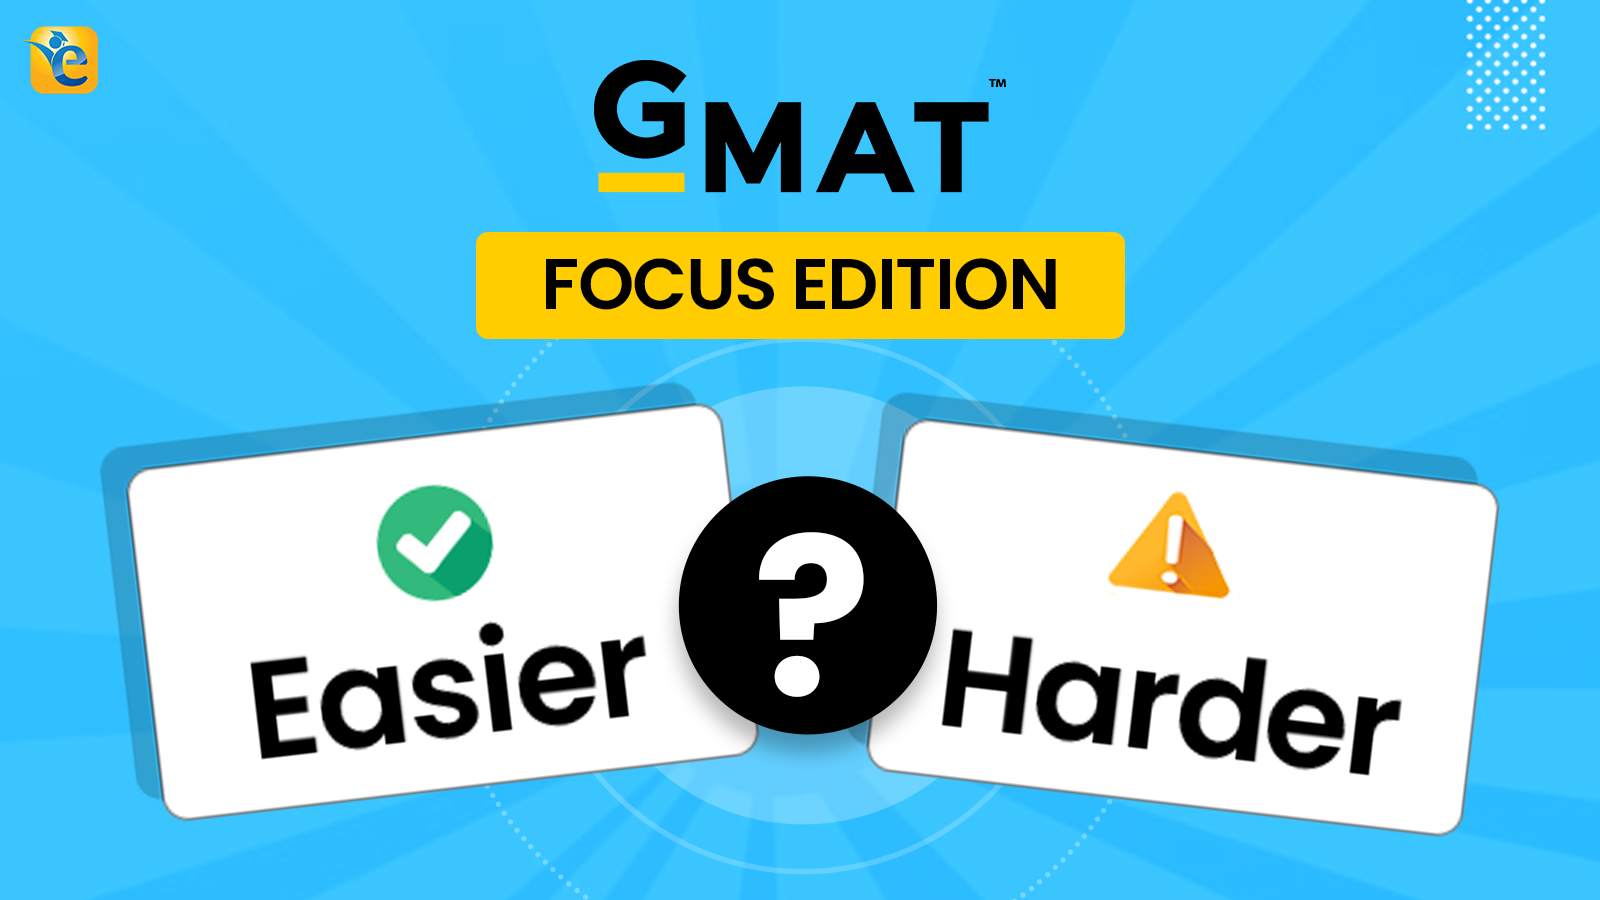 is the GMAT Focus Edition Hard